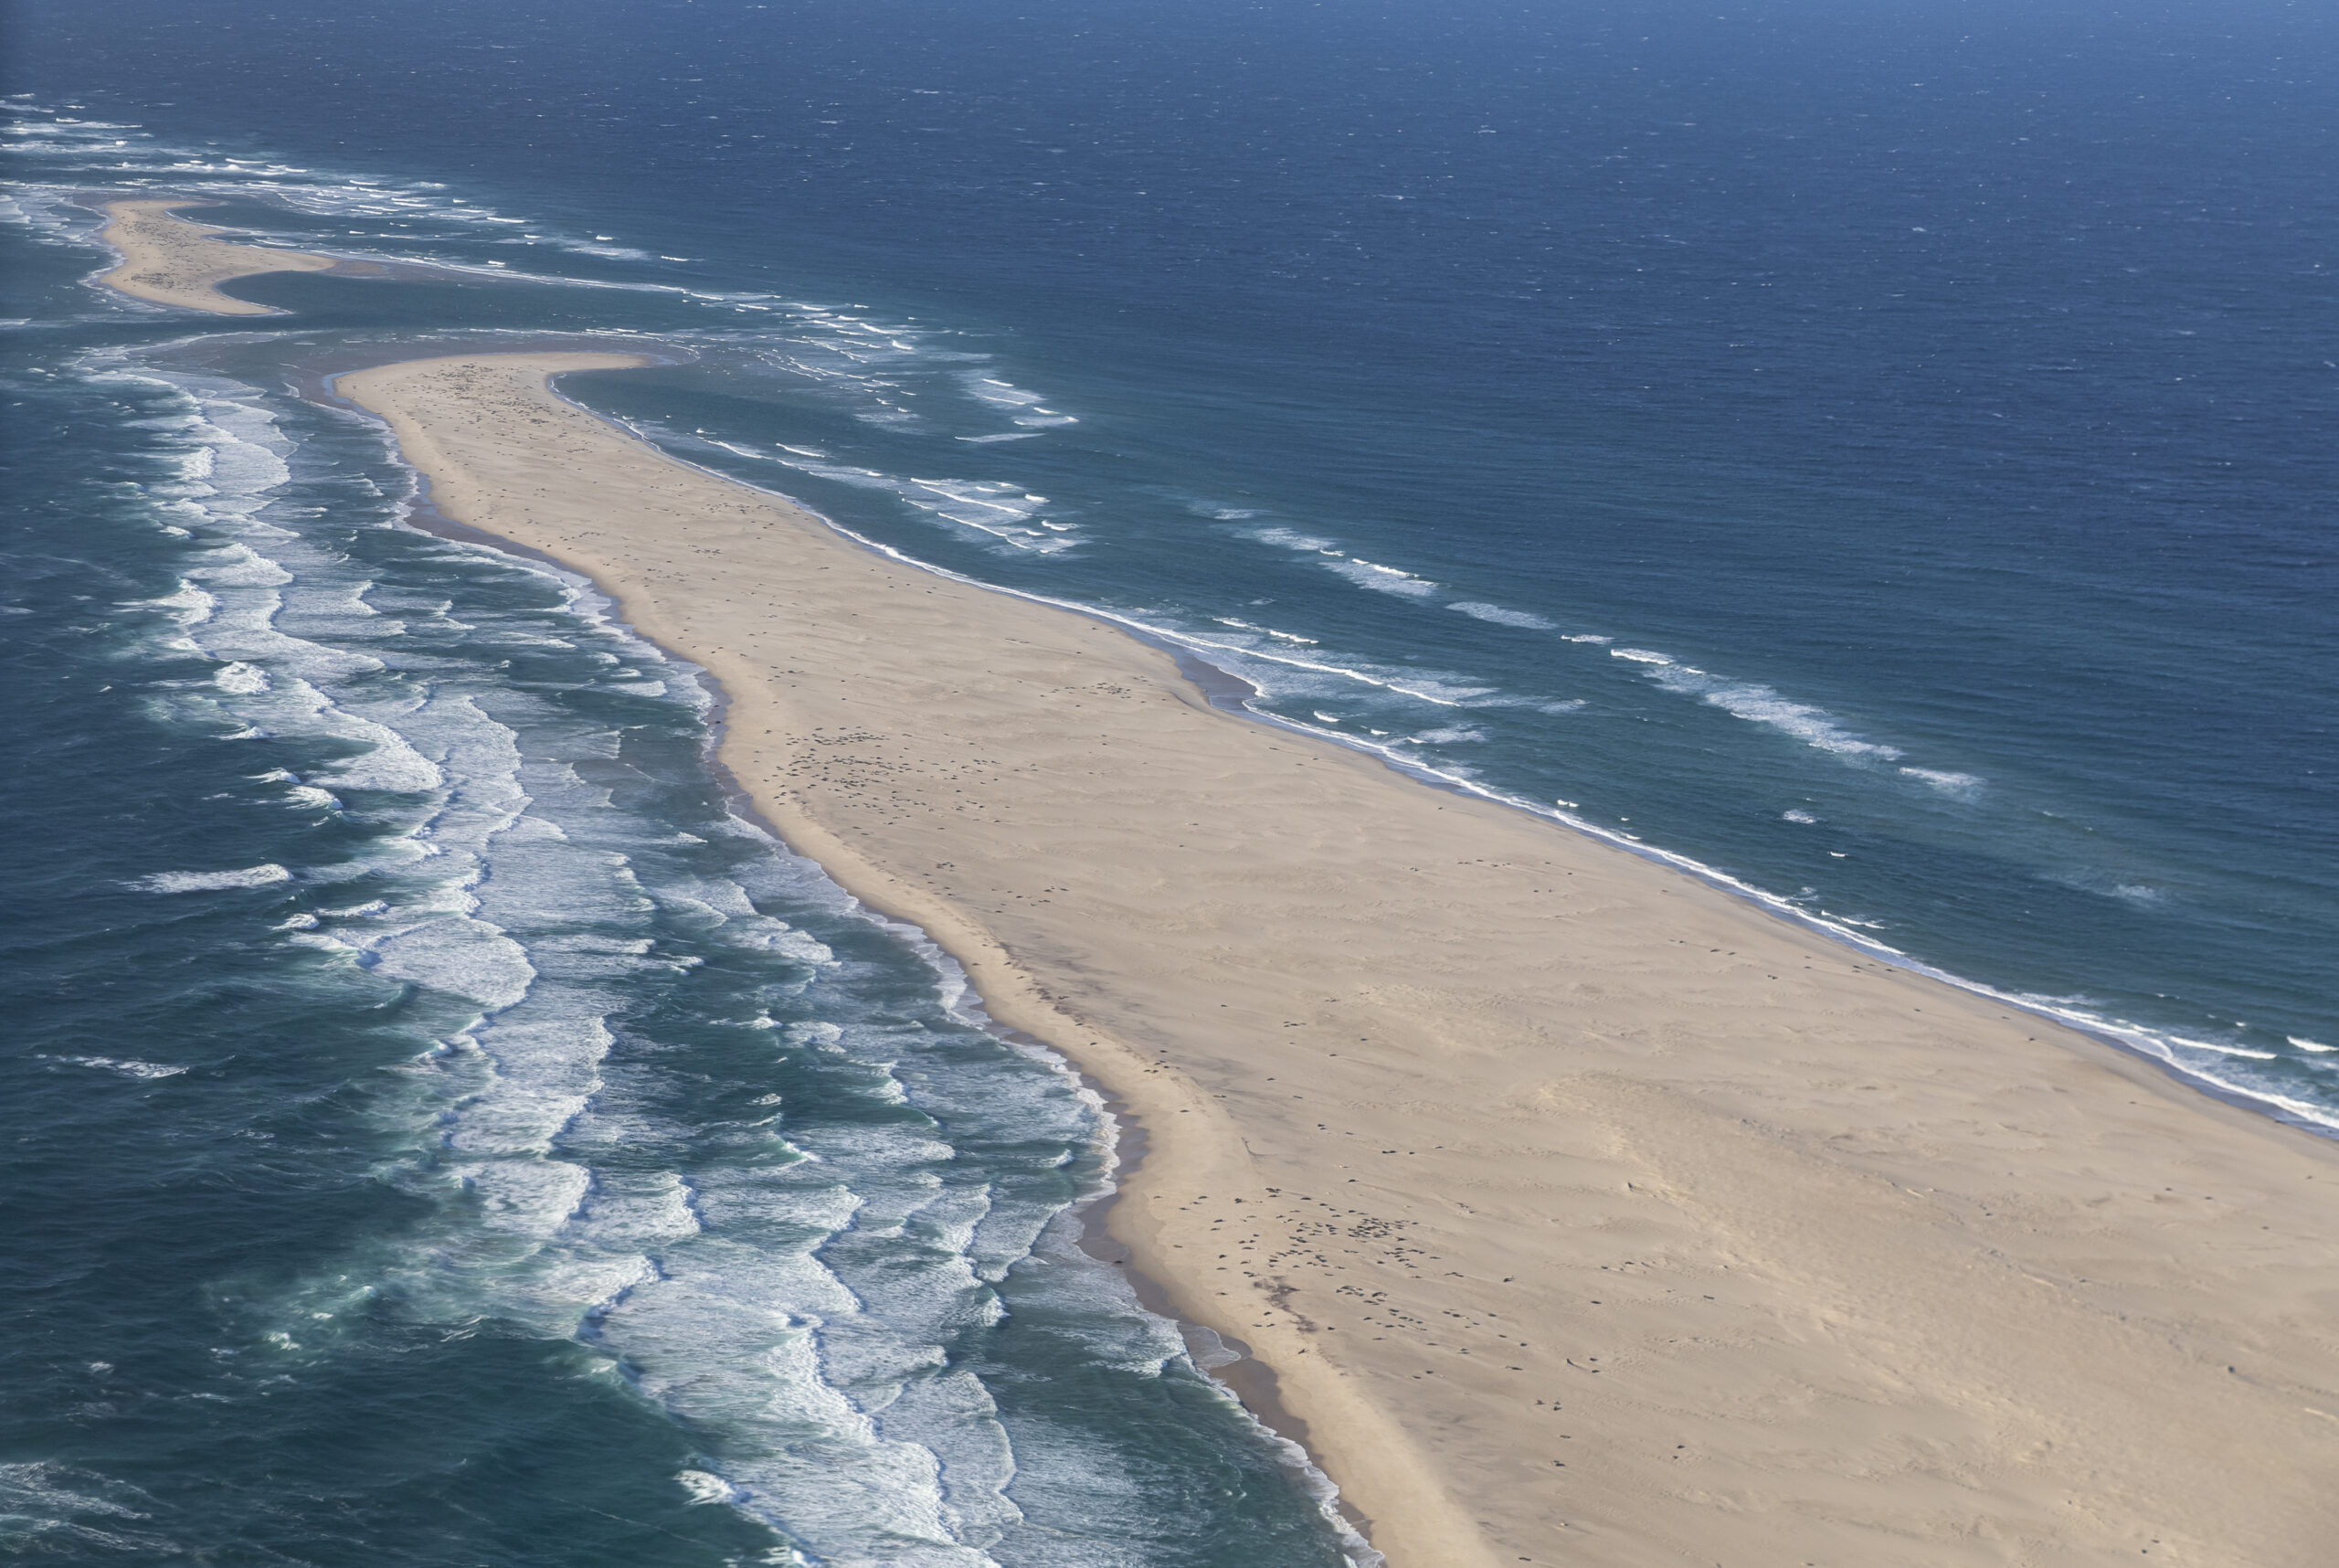 The West Spit, Sable Island